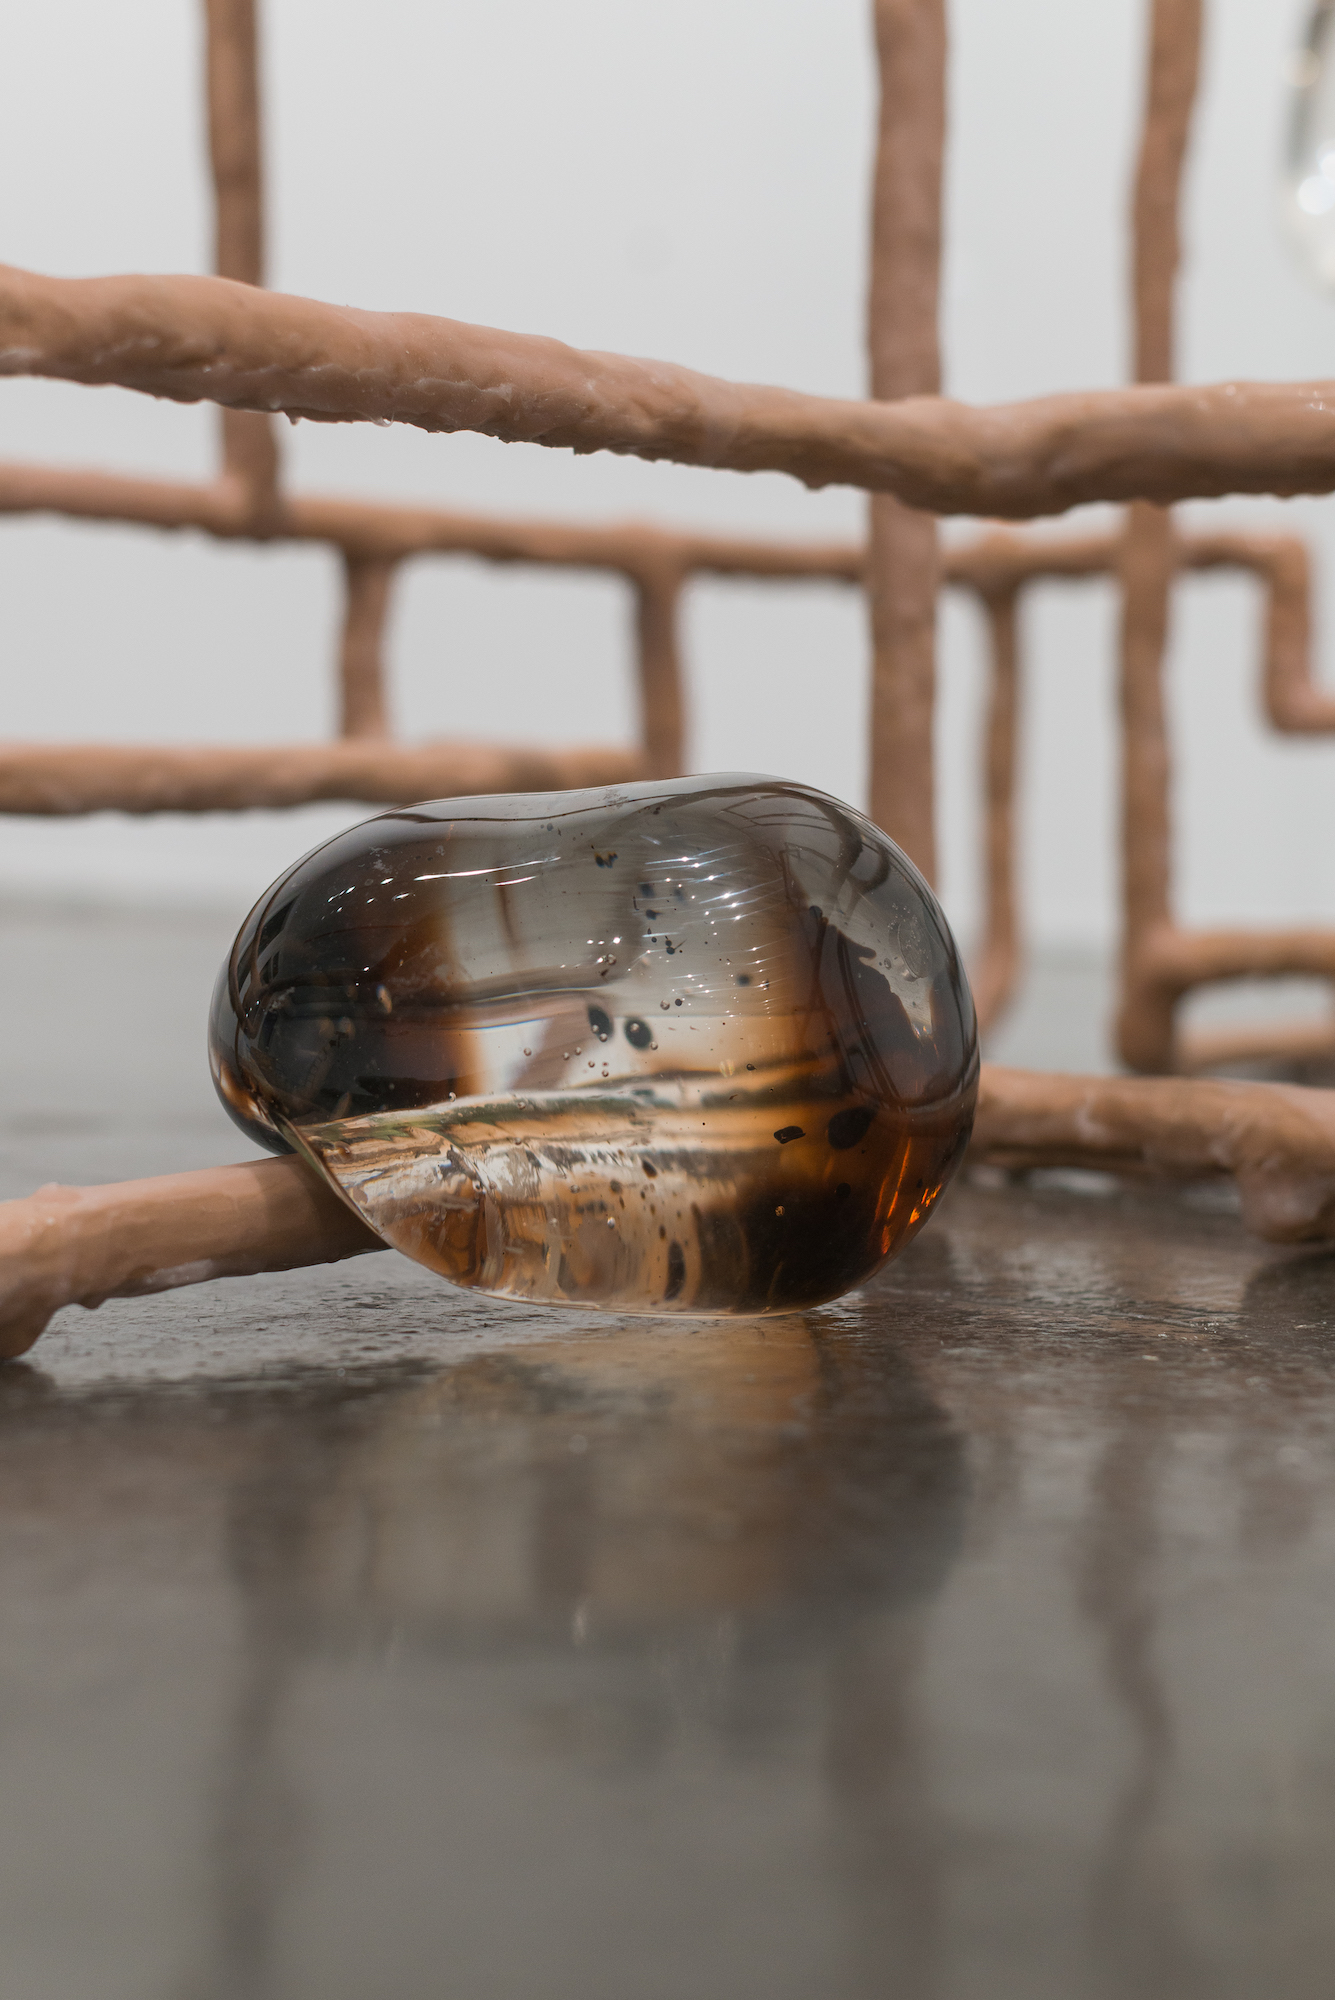 A globular piece of glass drapes over a flesh colored tube with more creating a web in the background, a dark liquid in encased in the glass.